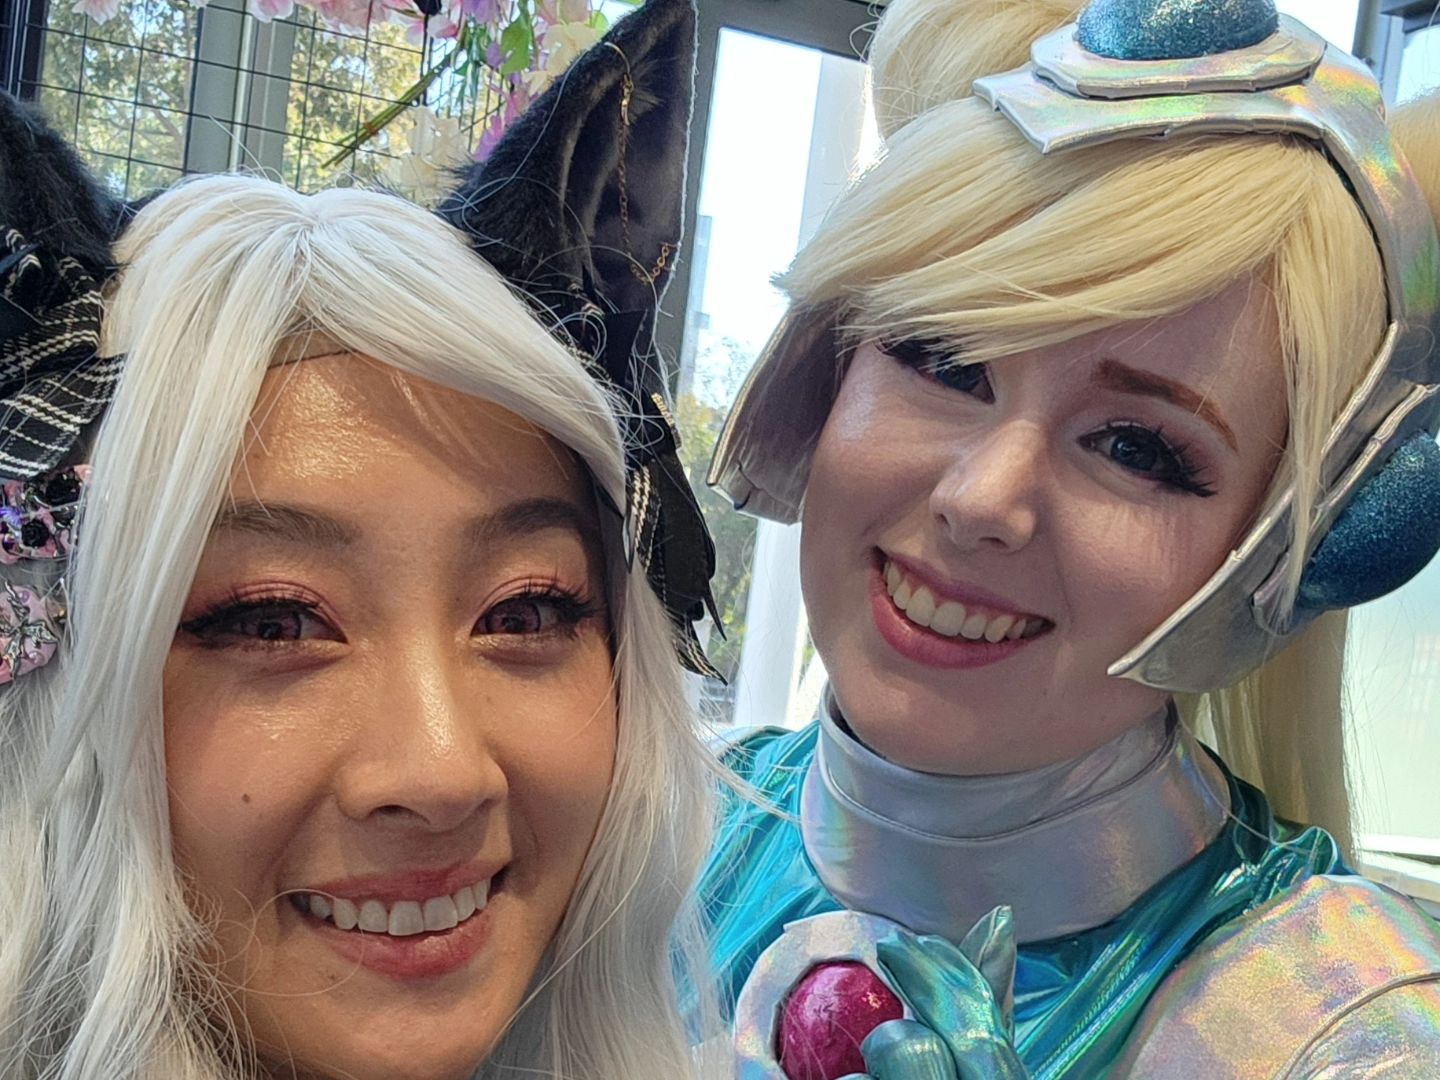 Thats a wrap! 🌈🪩 What an absolutely mental weekend. Thanks @dreamhackau for the amazing time & the amazing @mangalphantom for having me as the special guest on the @justbecos.cast It was so much fun! I hope we can get up more shenanigans soon! Hehehe, also thank you all so much for the support on my Lux cosplay! Everyone was so kind & encouraging. It felt so cool to get back into making stuff from scratch & seeing the result in the enthusiasm from my fellow League players!!! 🥹 I also got to see so many amazing & wonderful friends. It's great to be back at cons 💜💜💜
I can't wait to come back to DreamHack next year!
#league #leagueoflegends #lux #luxcosplay #spacegroove #spacegroovelux #dreamhack #dreamhackau2024 #dreamhackau #spacegroovecosplay #spacegrooveluxcosplay